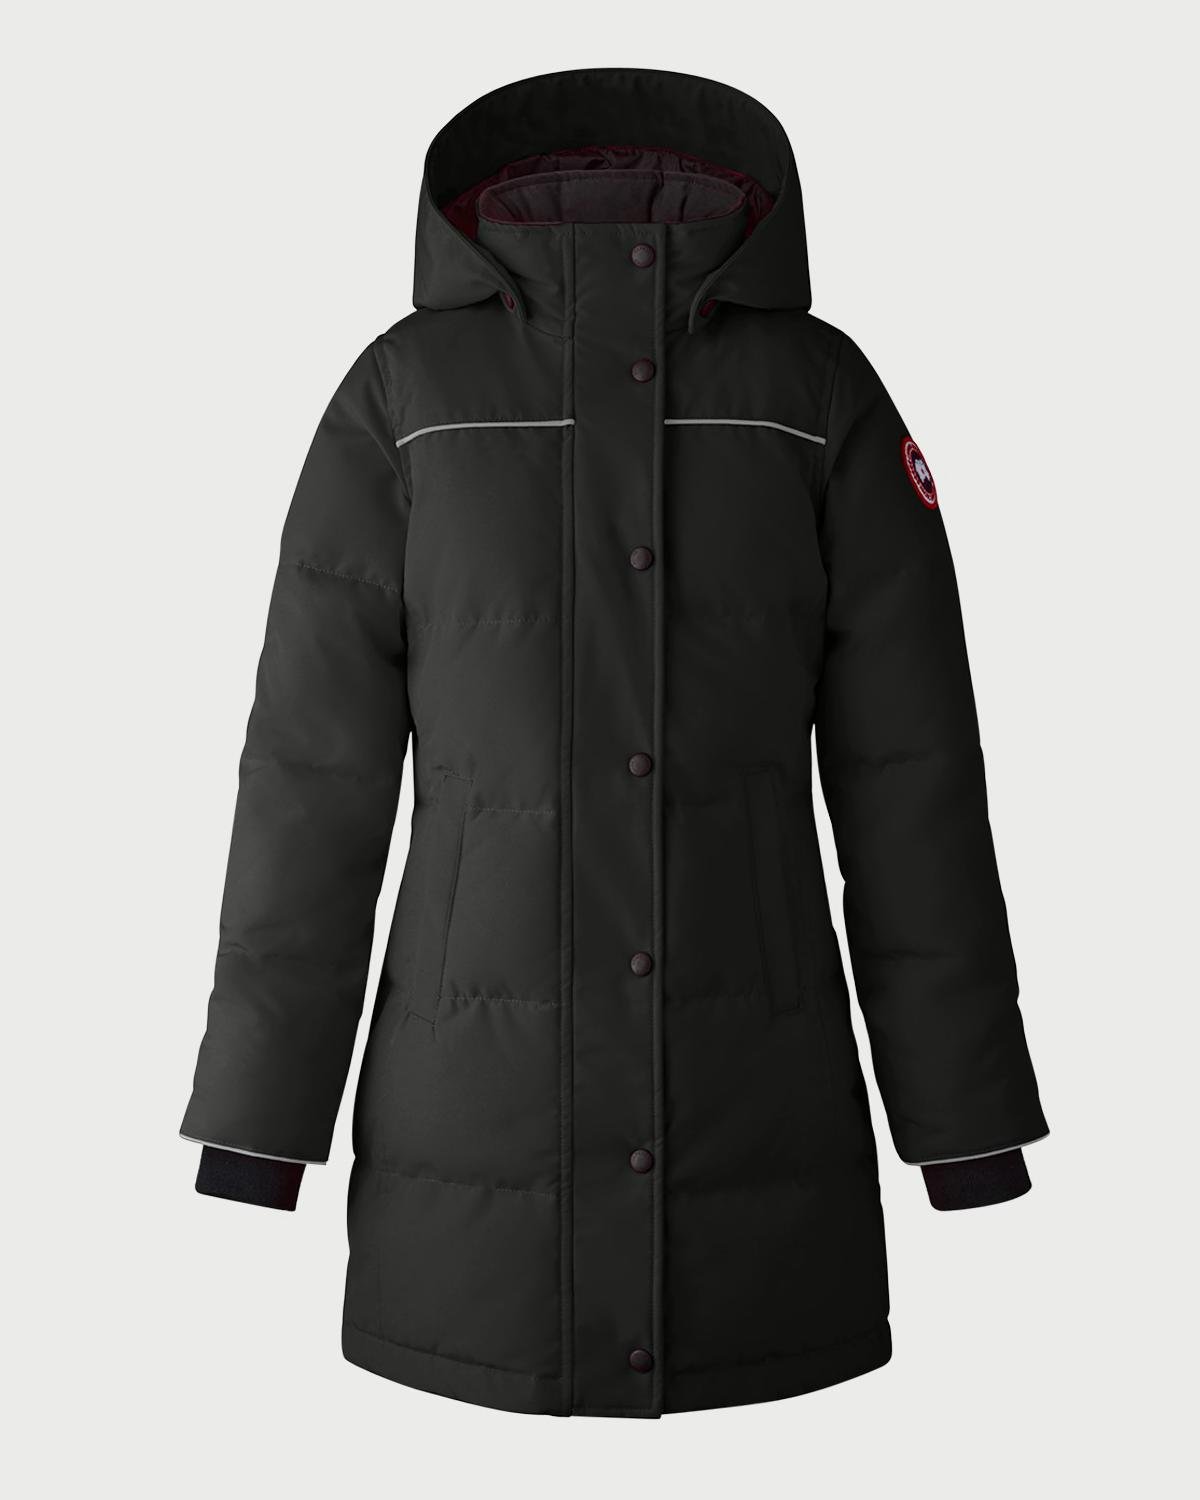 Kid's Juniper Parka, Size S-XL by CANADA GOOSE